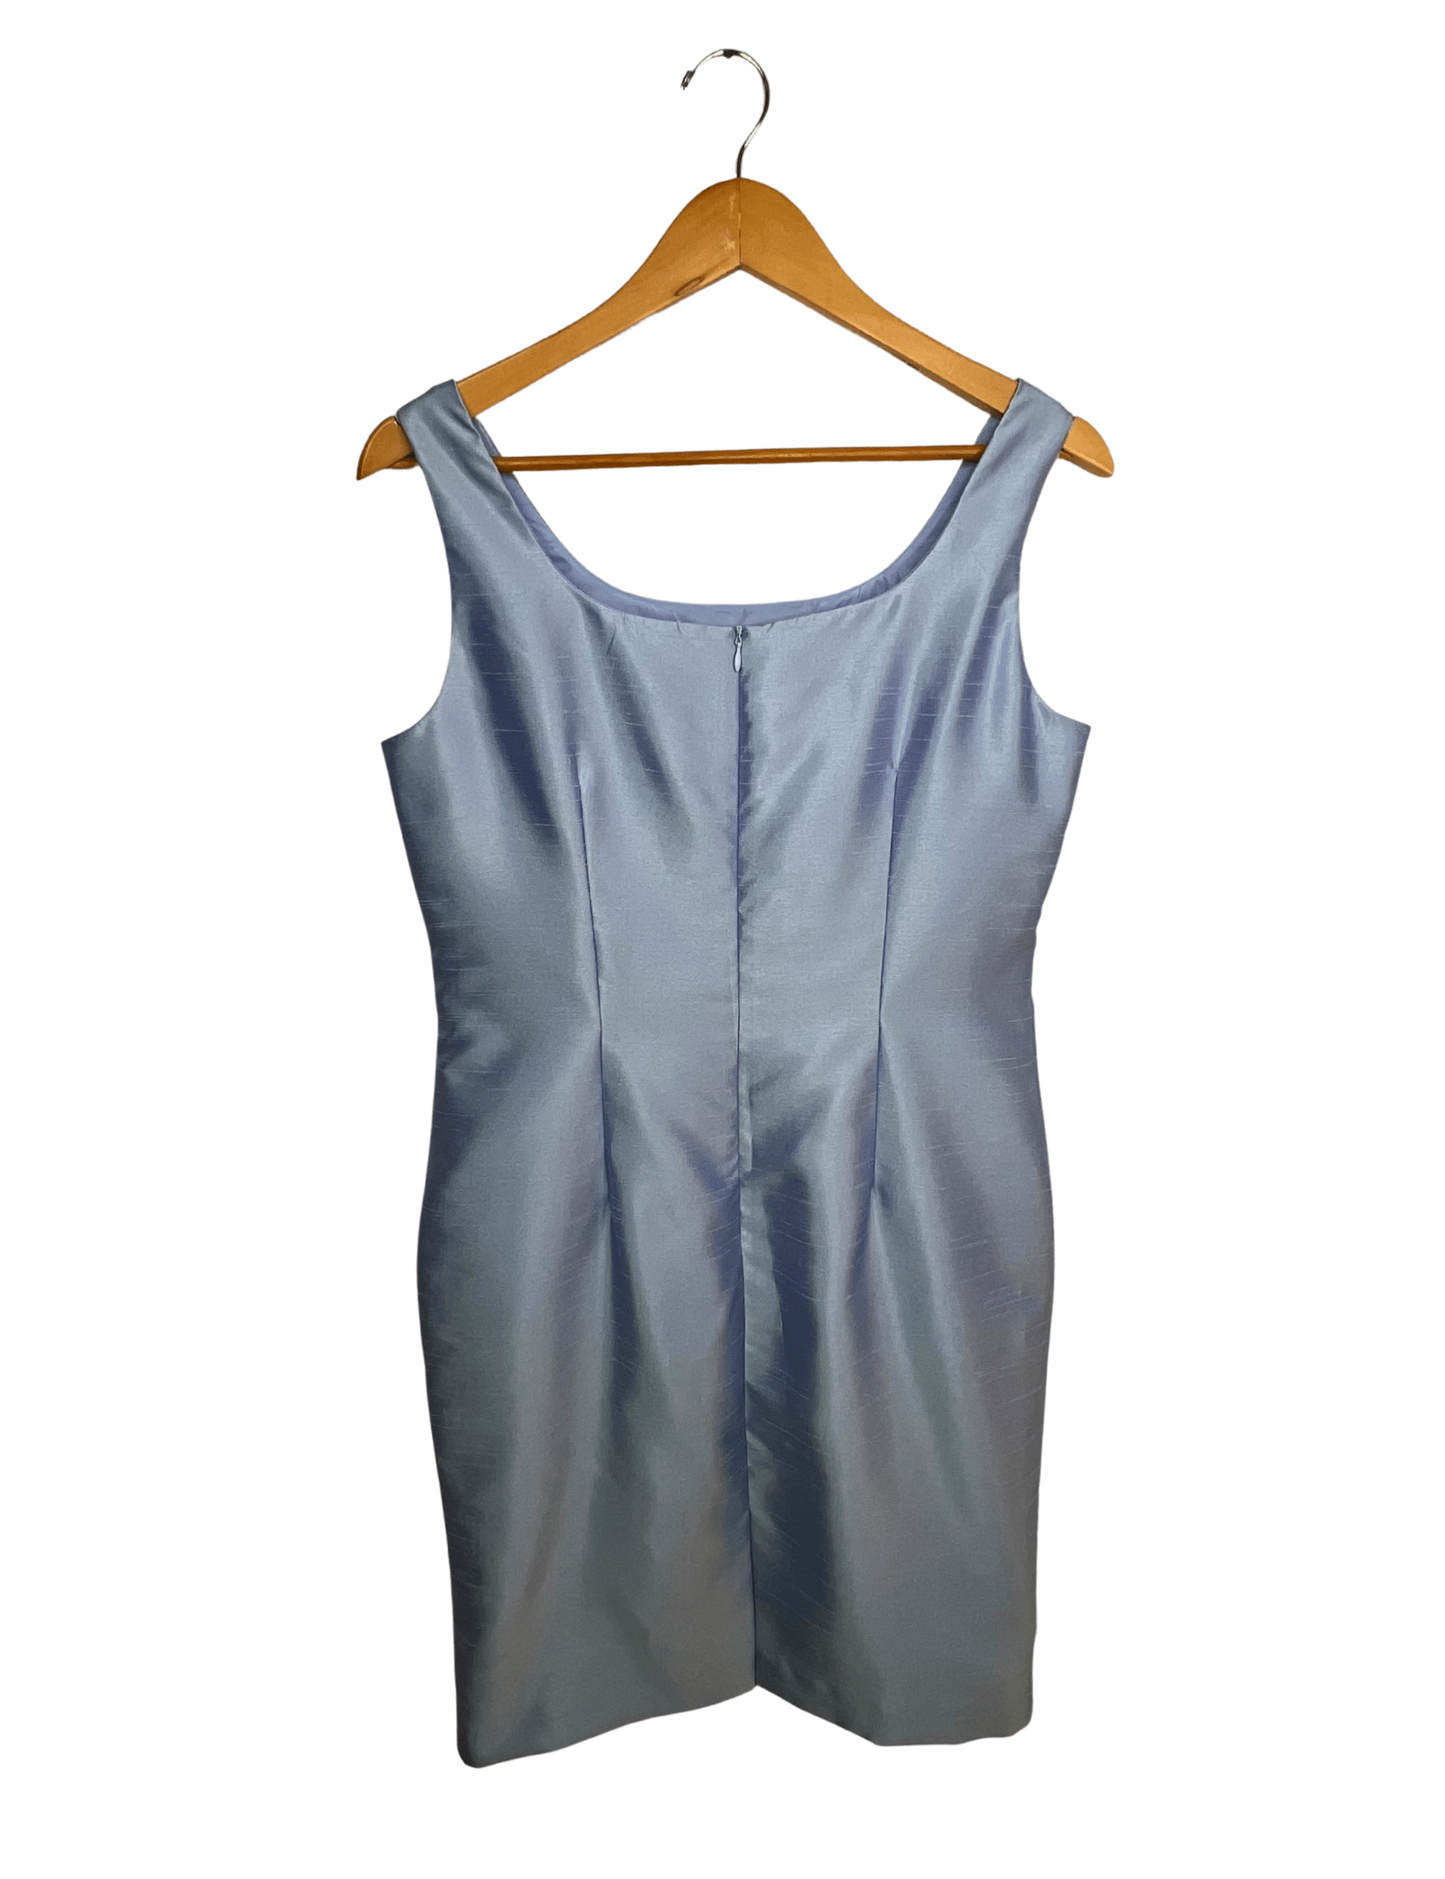 00’s Y2K Iridescent Periwinkle Virgo Prom Cocktail Sheath Dress Size 8